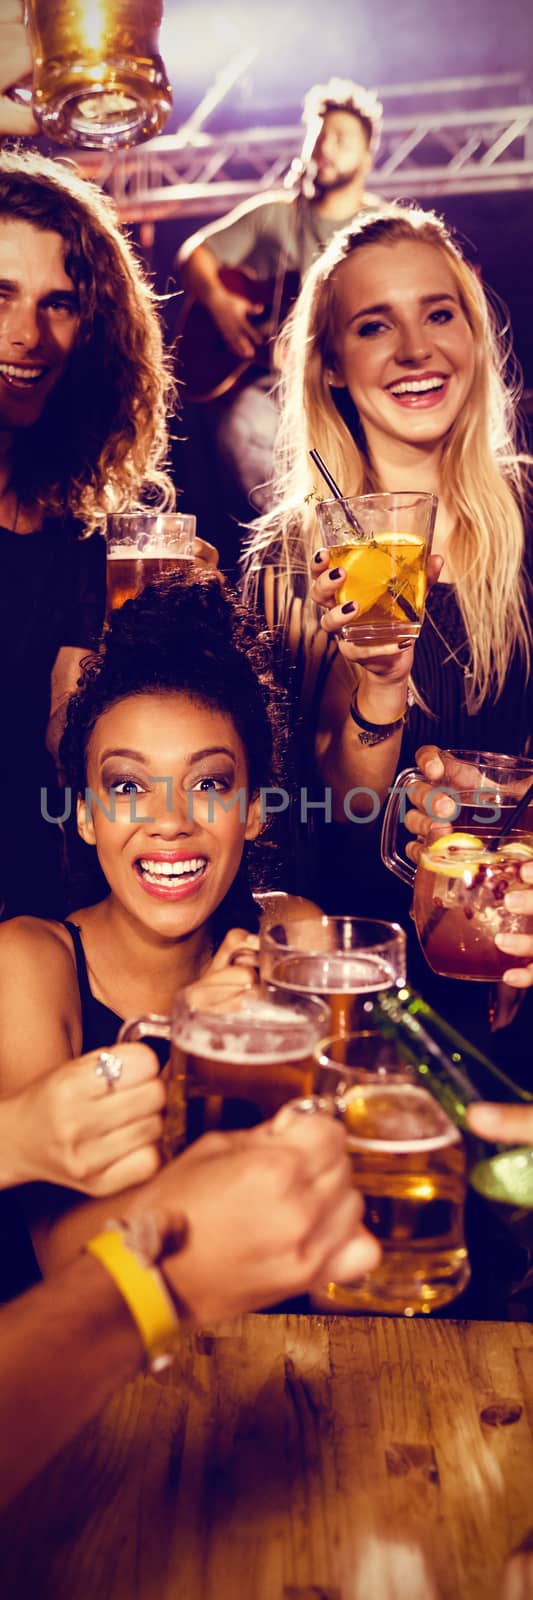 Portrait of cheerful friends toasting drinks at table with performer singing on stage in nightclub